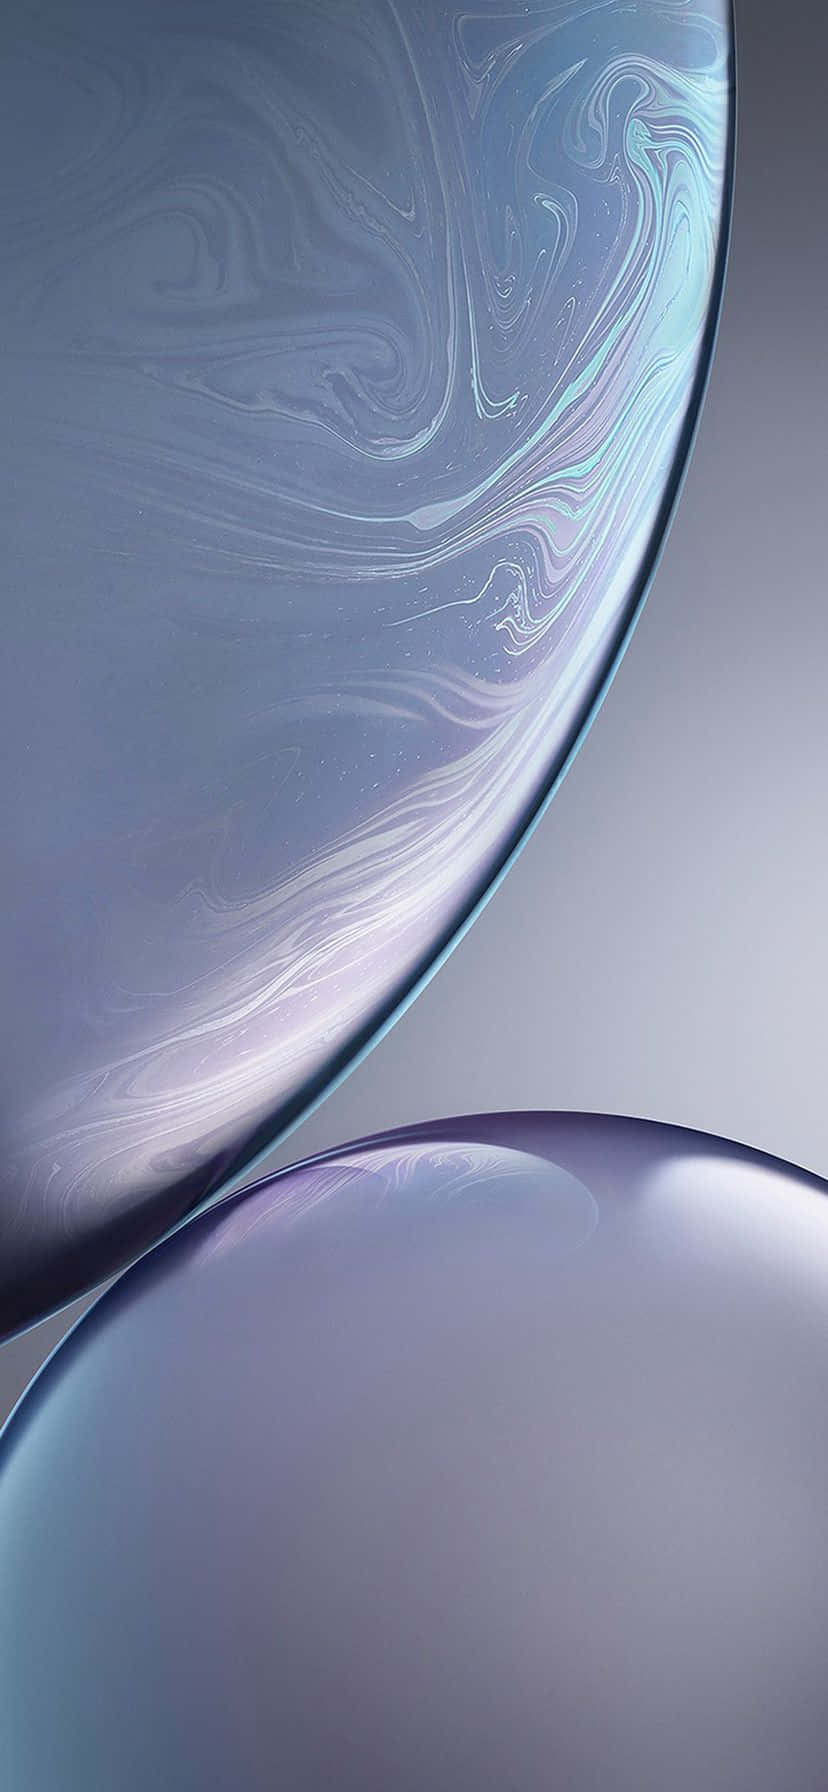 Iphone Xr - Take Your Mobile Experience To The Next Level Wallpaper